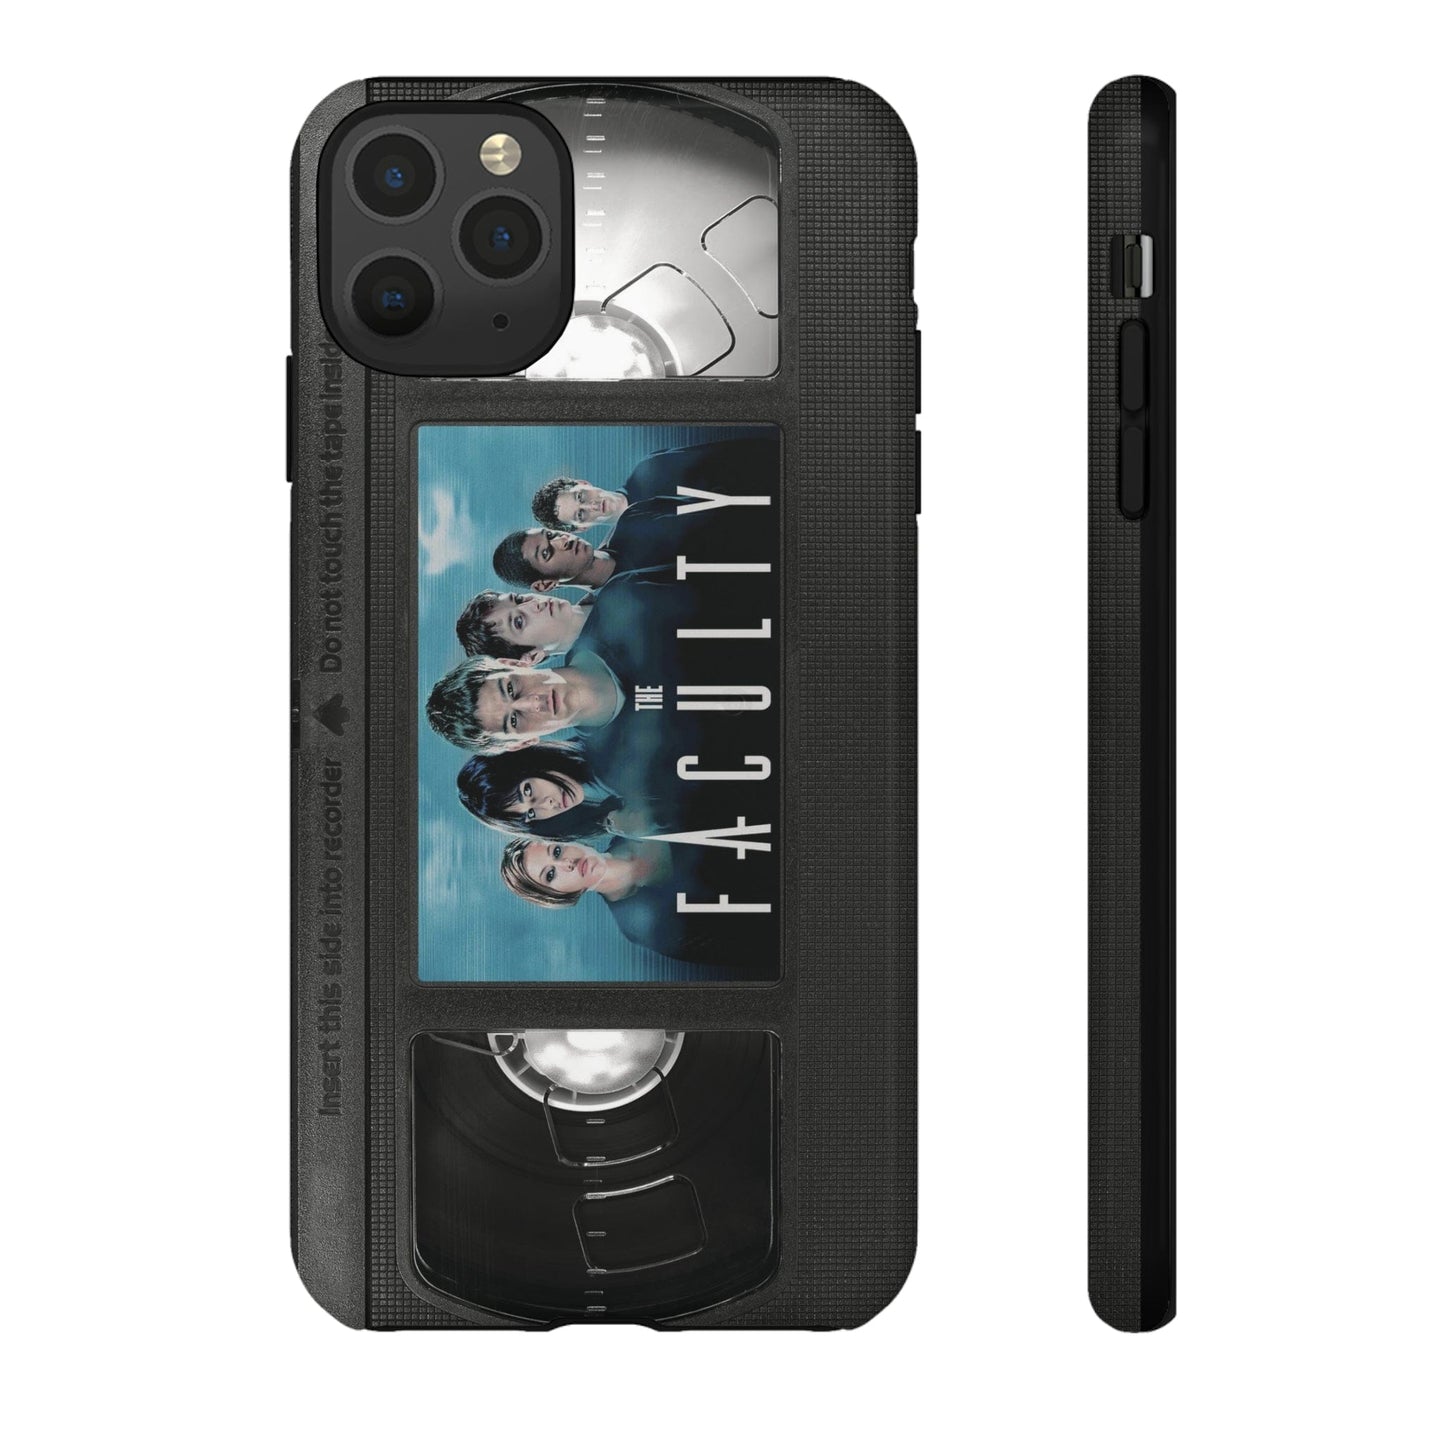 Faculty Impact Resistant VHS Phone Case